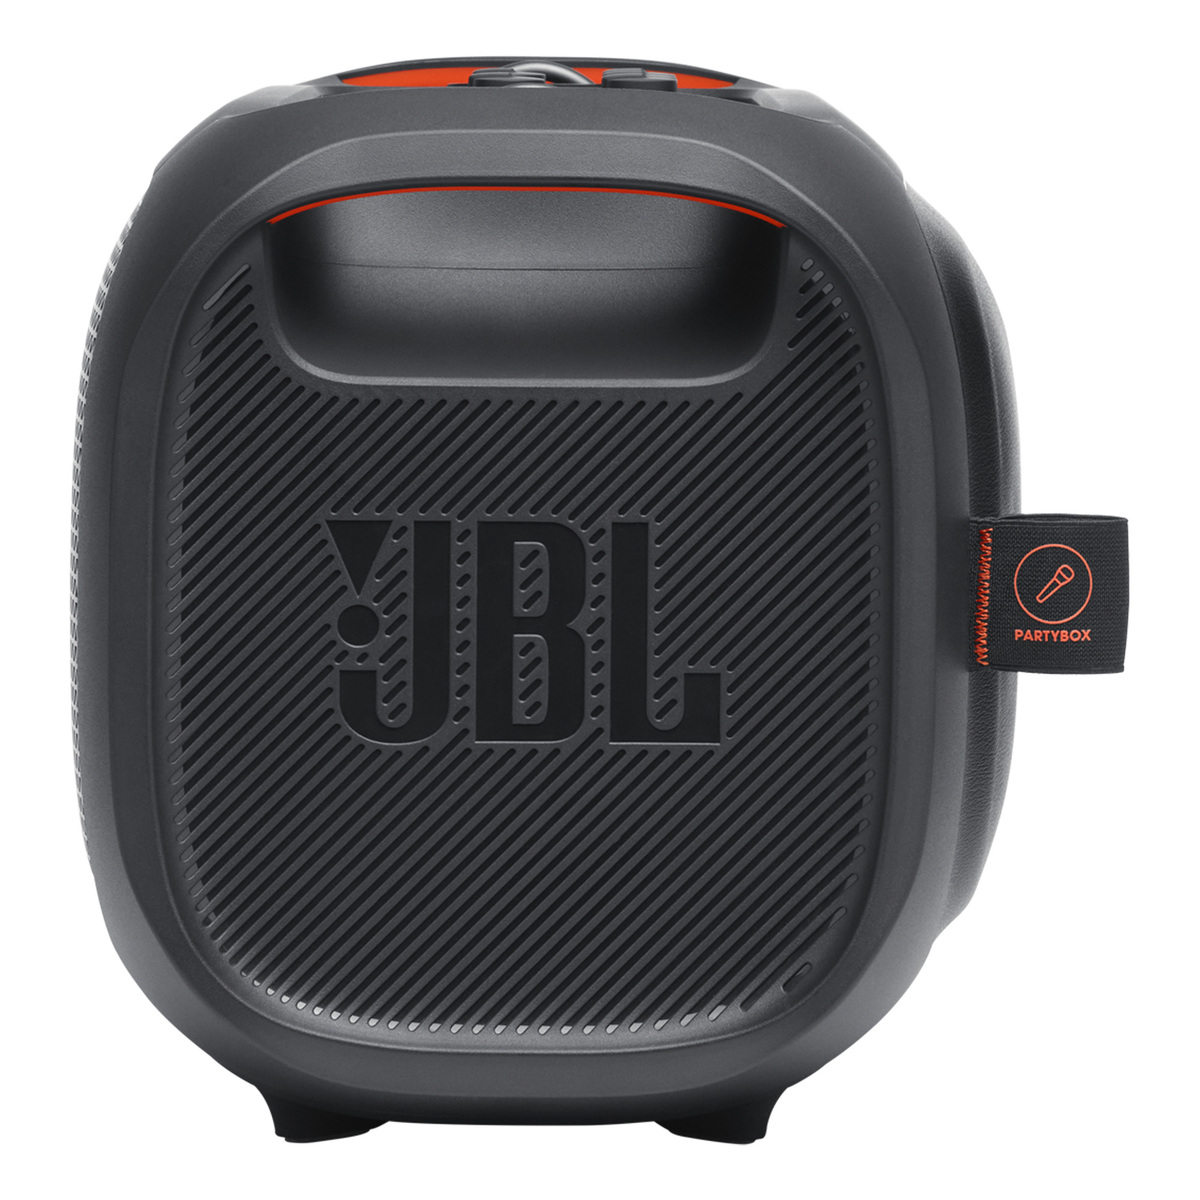 JBL Partybox On-The-Go Essential Portable Party Speaker With Built-In Lights And Wireless Mic